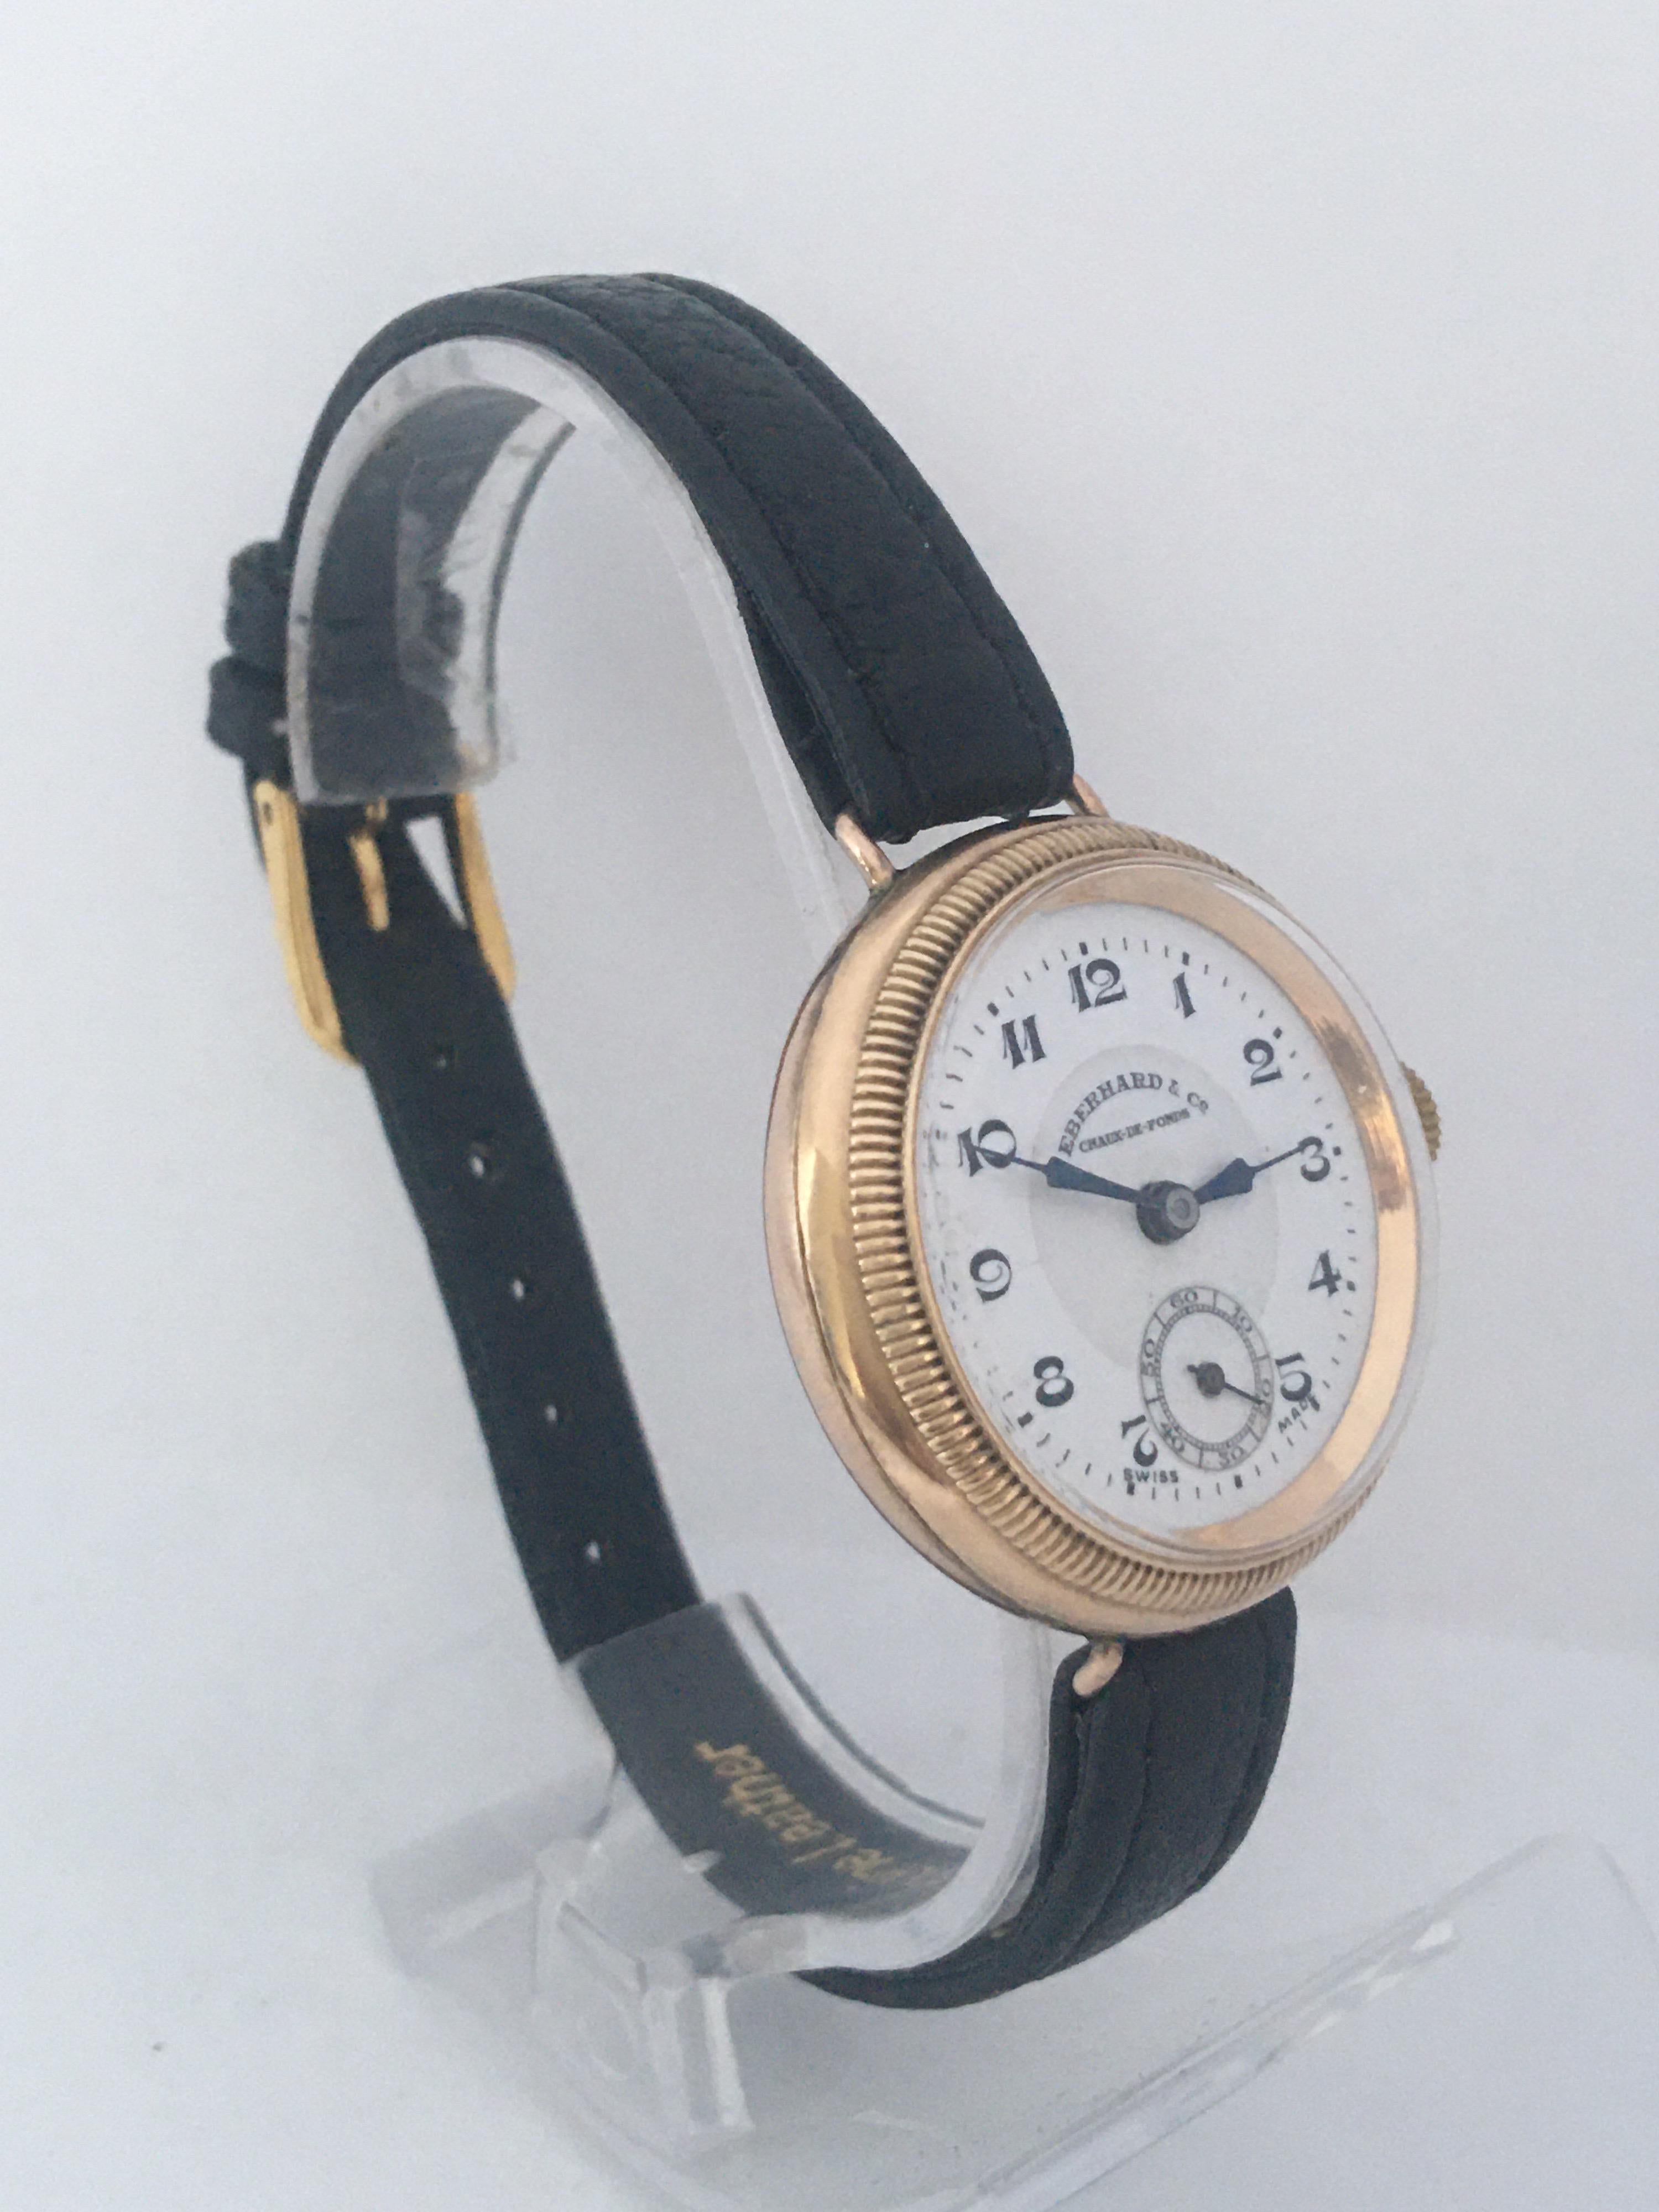 This beautiful luxury watch is in good Working condition and is ticking well. With its screw front Bessel to open. The gold back case has Initials engraved K A A . Some tarnish on the winder